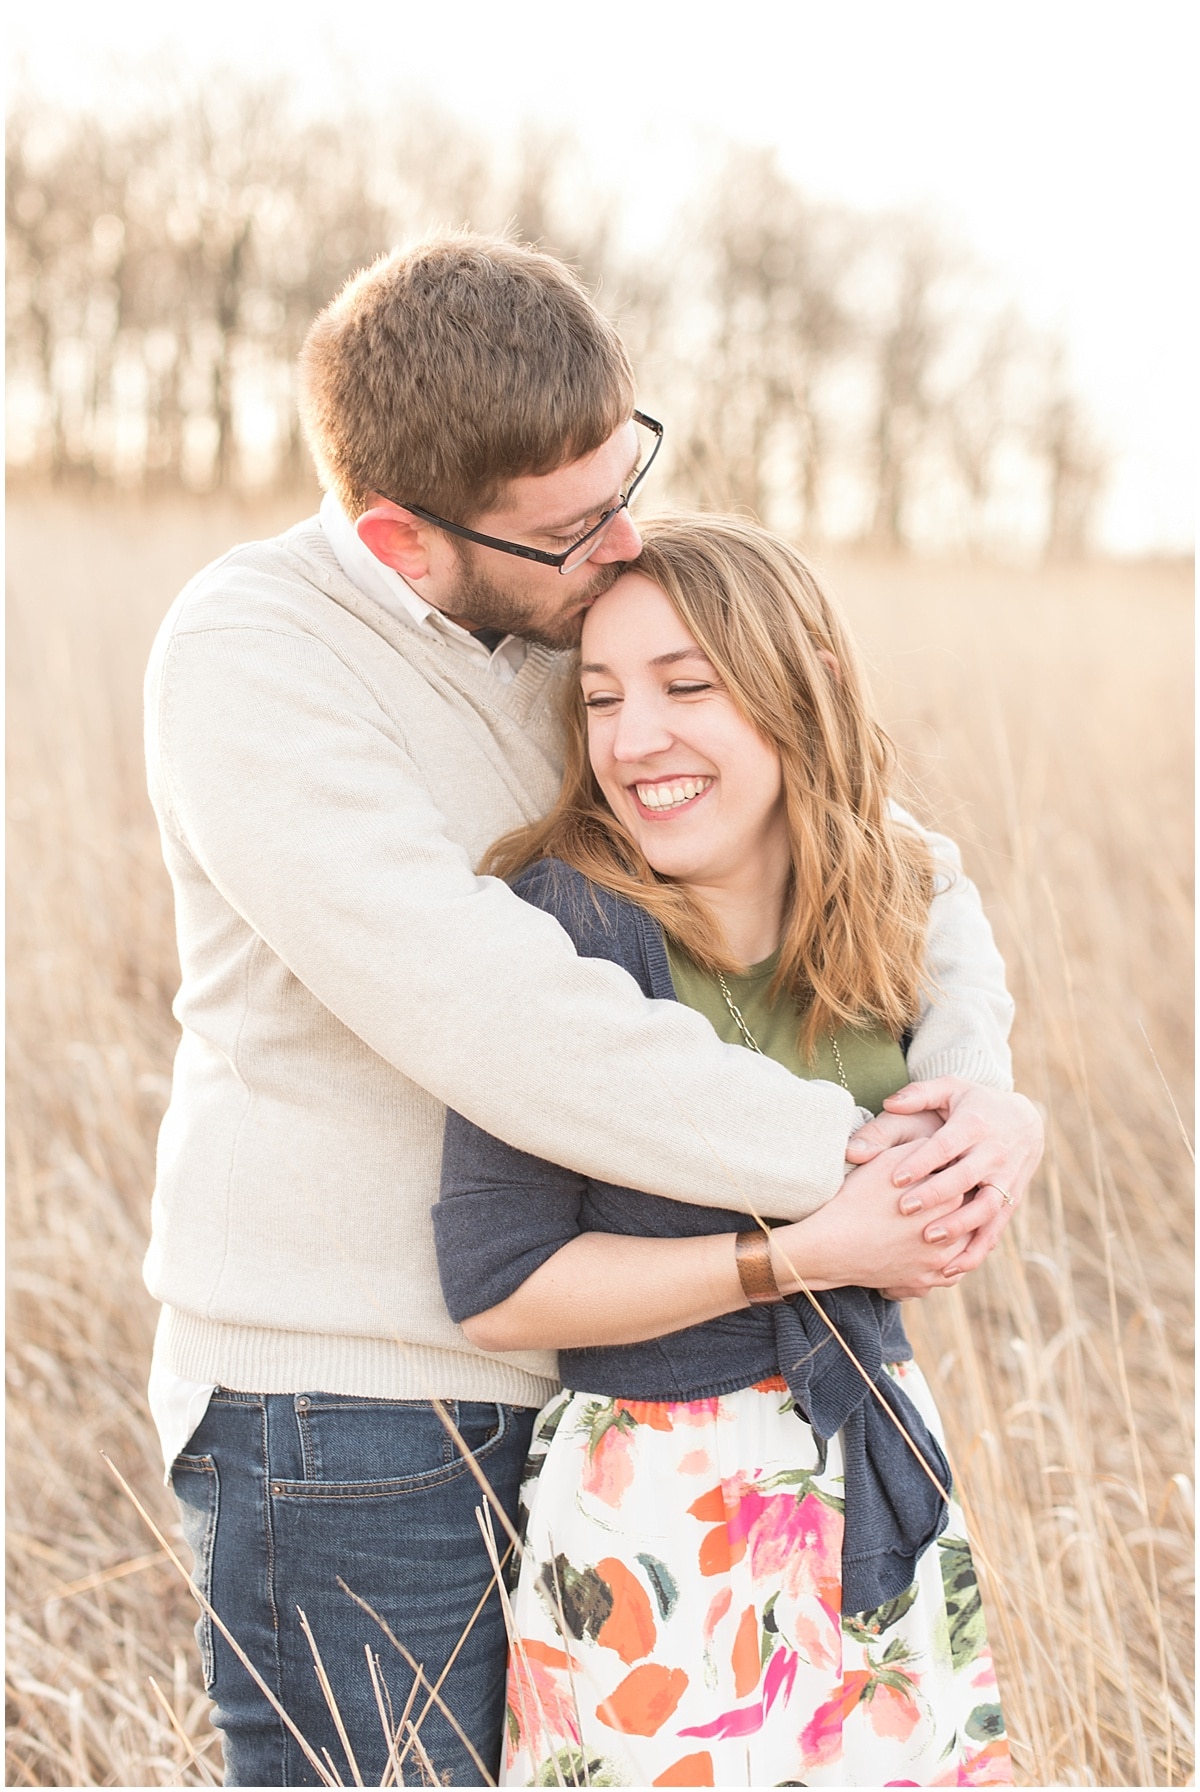 Stephen and Jessica had took their engagement photos in West Lafayette, Indiana.